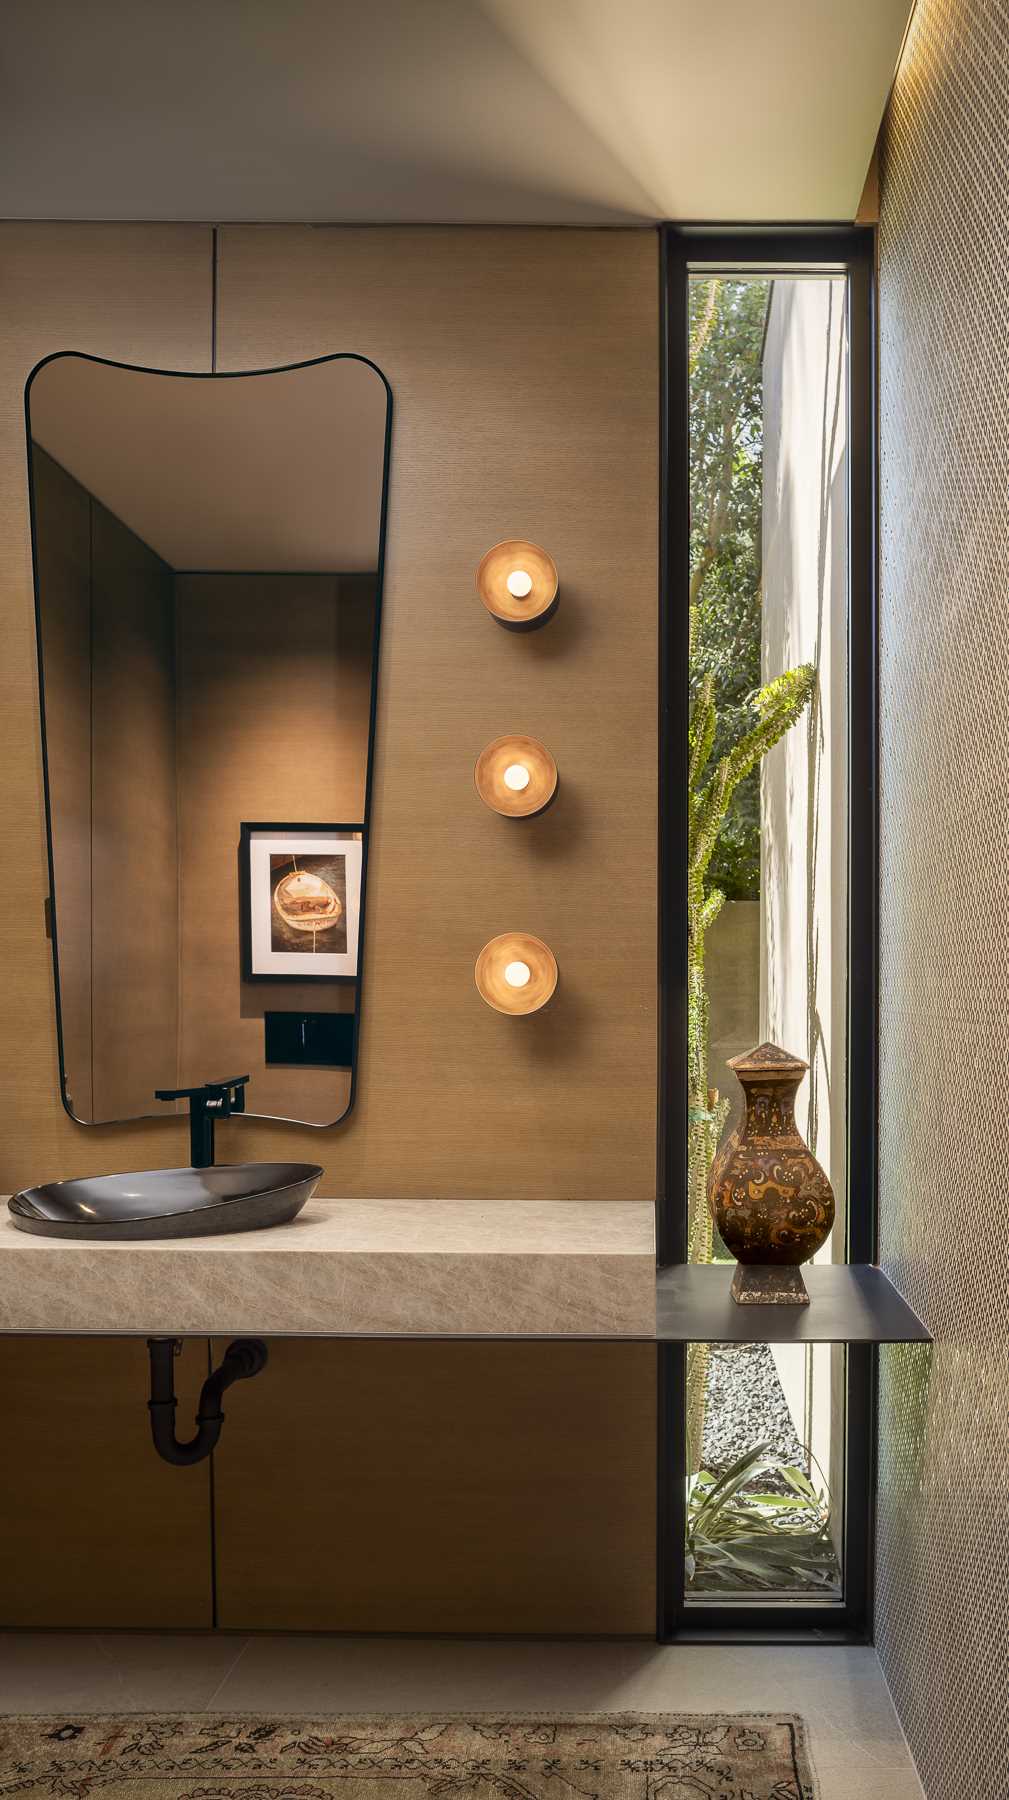 In a powder room, a vertical window gives a glimpse of the outdoors, while a uniquely shaped mirror and wall lights add interest.